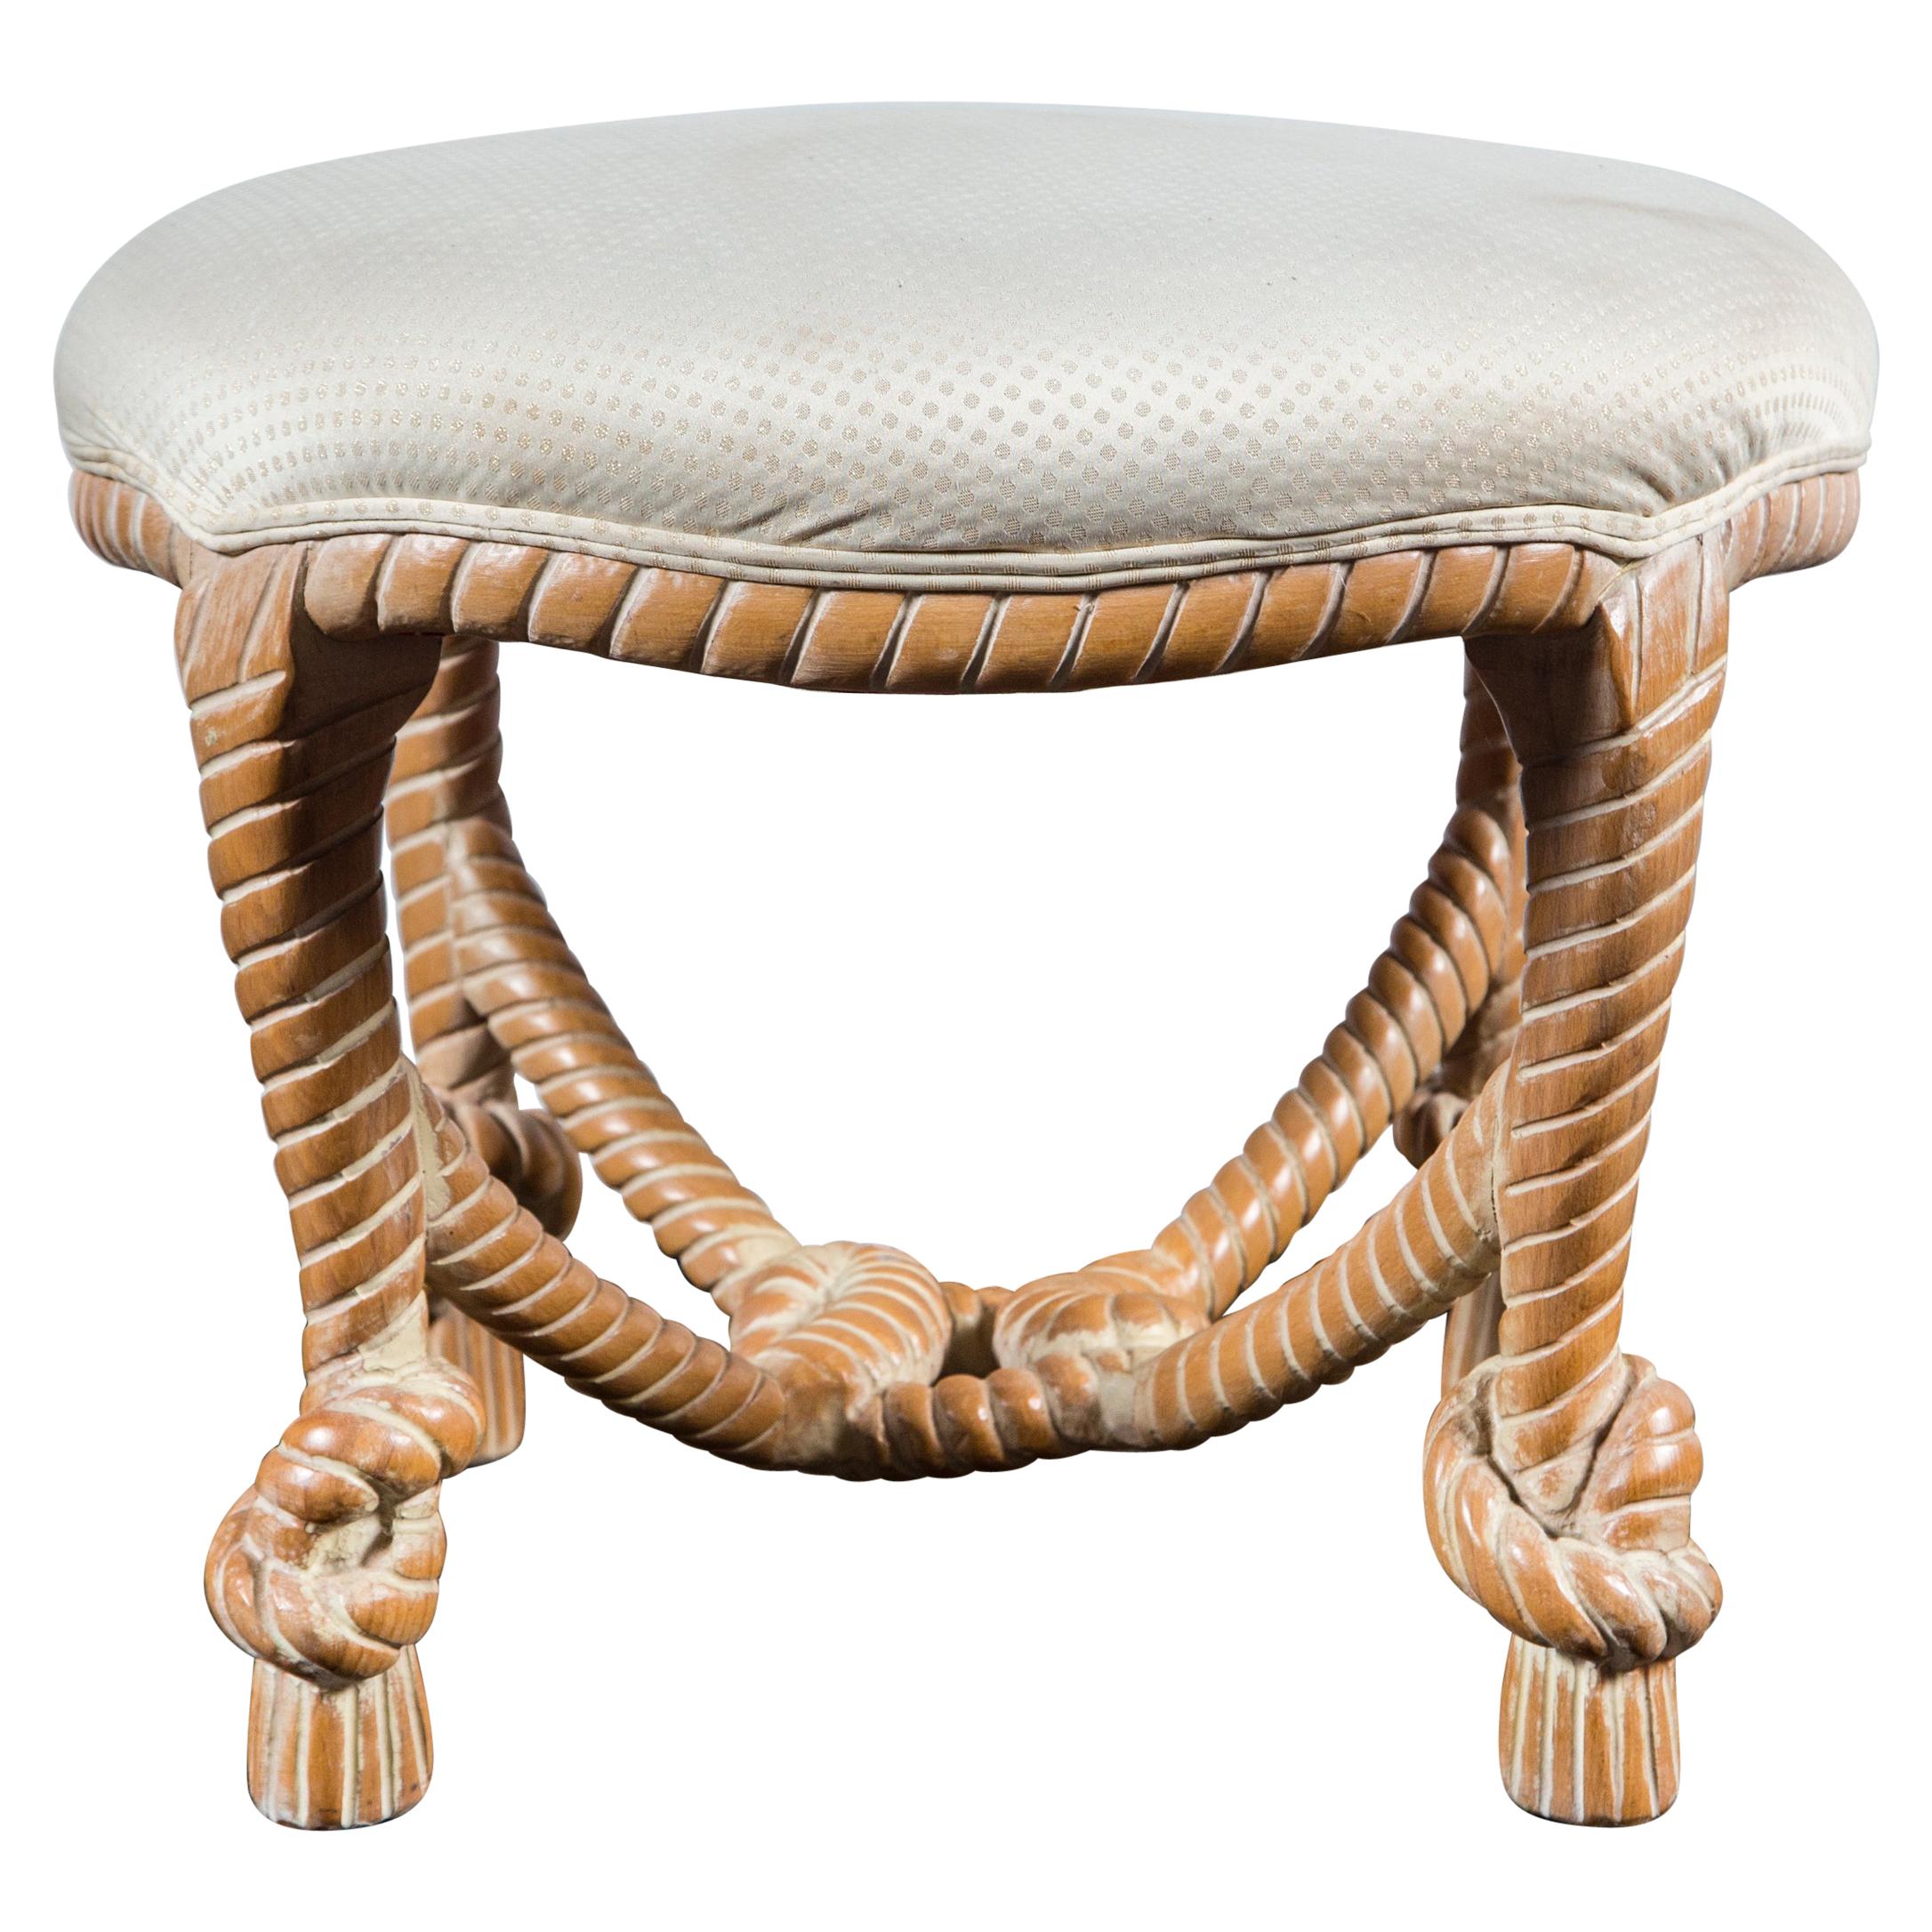 Carved Wood Faux Rope Circular Bench, French Style